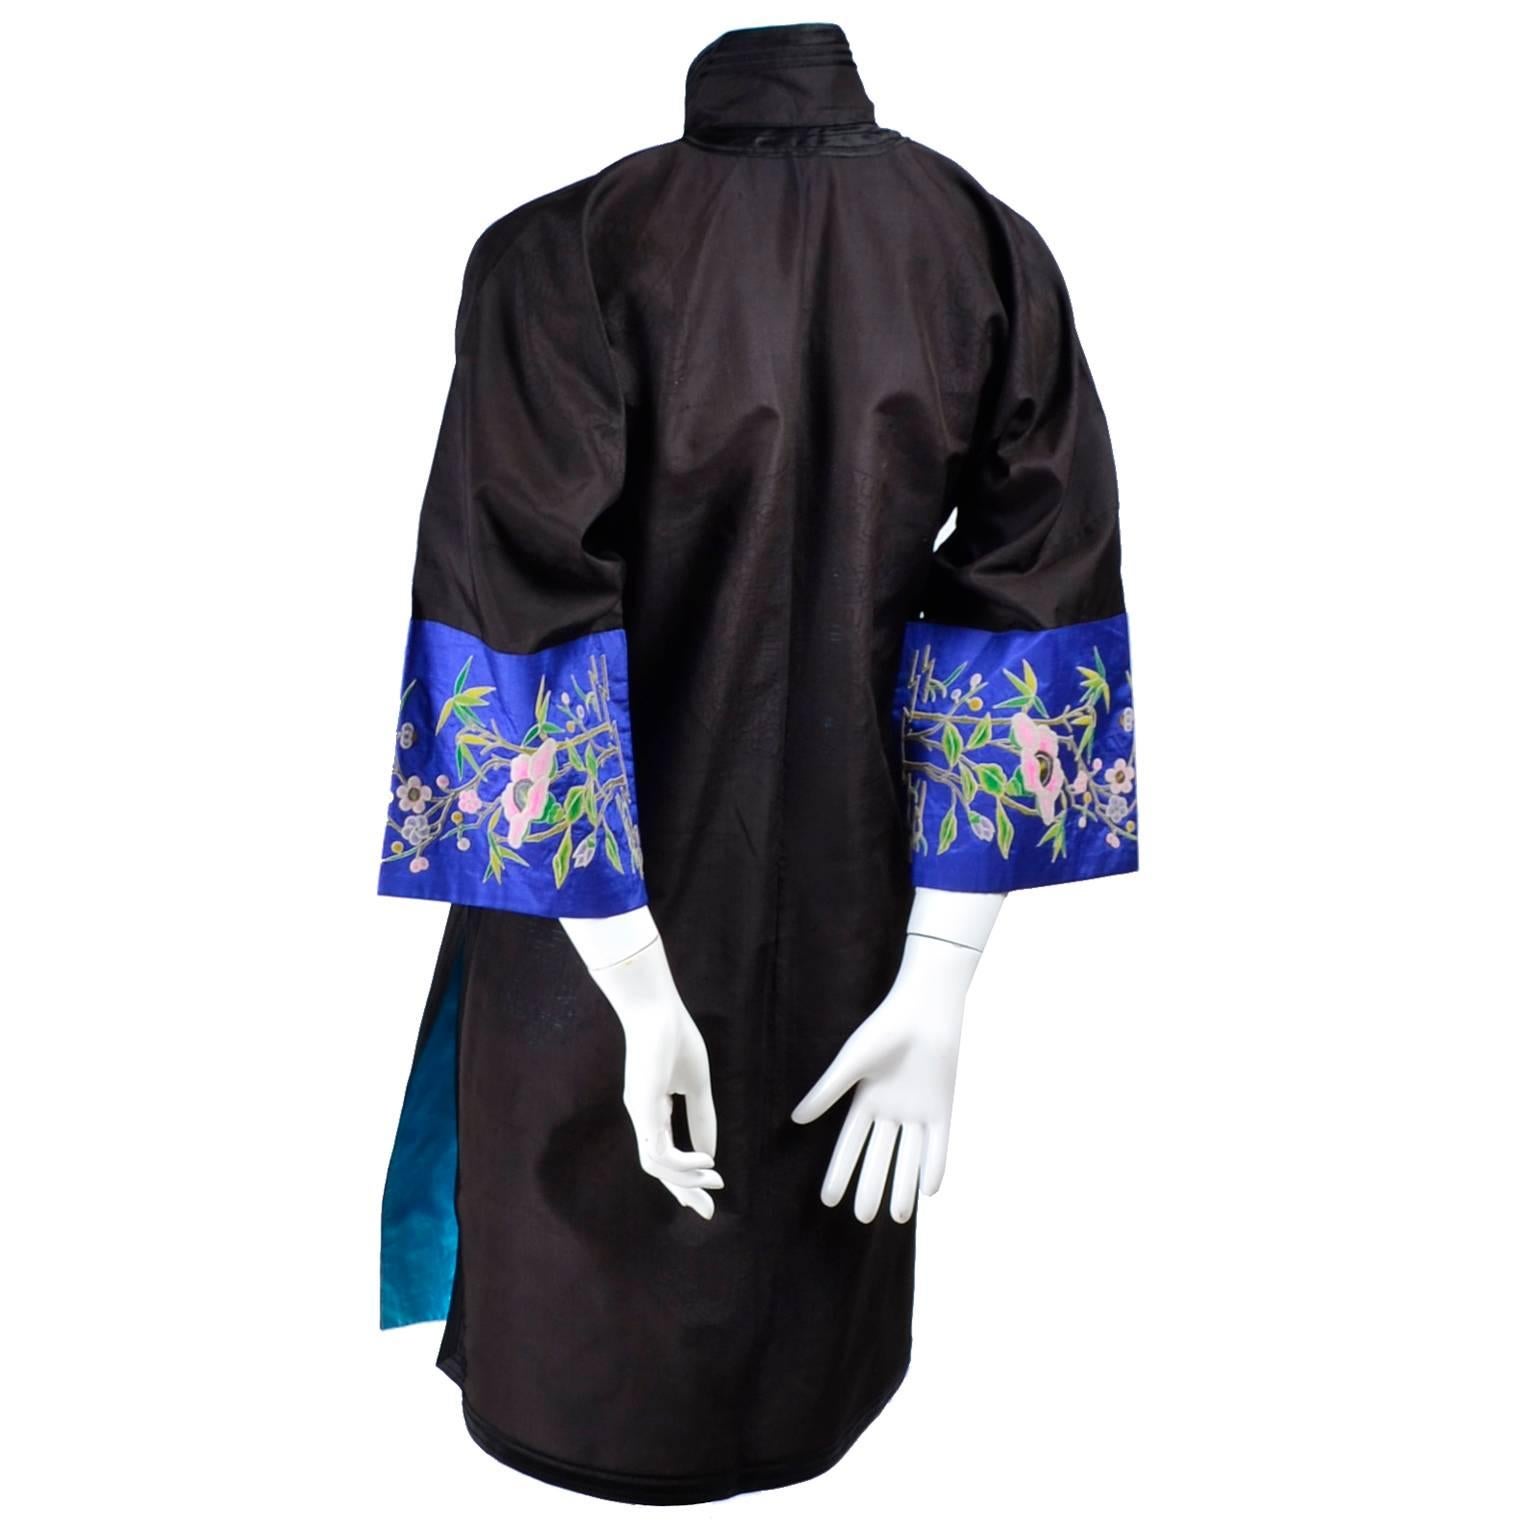 Antique Chinese Silk Robe Jacket With Micro Crewel Embroidery & Turquoise Lining